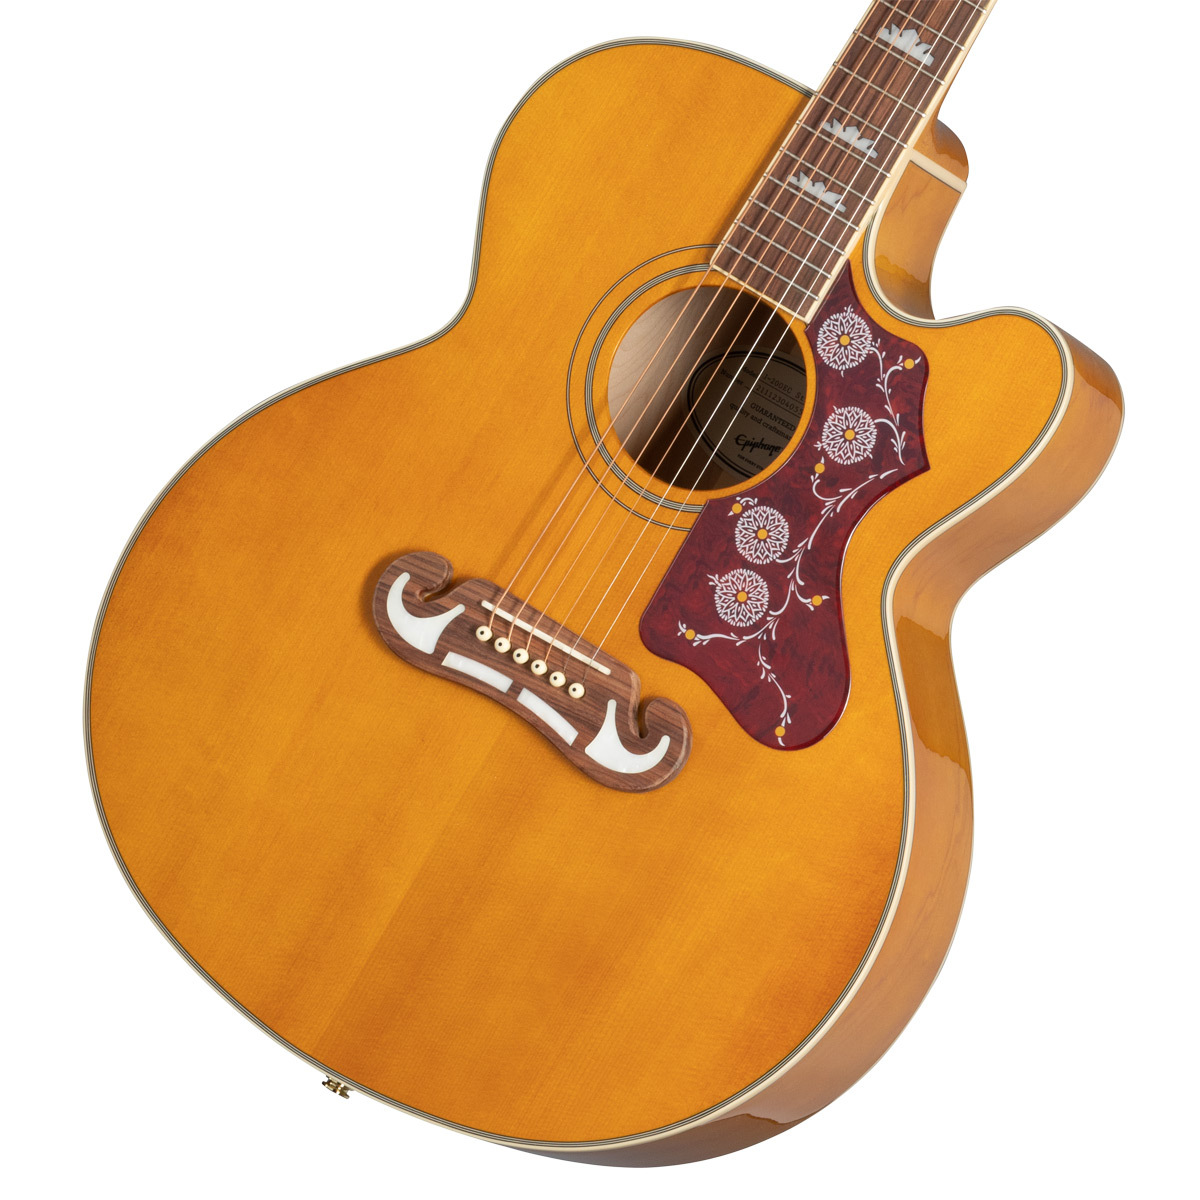 Epiphone EJ-200CE/N エレアコ バッグ付き - 楽器/器材